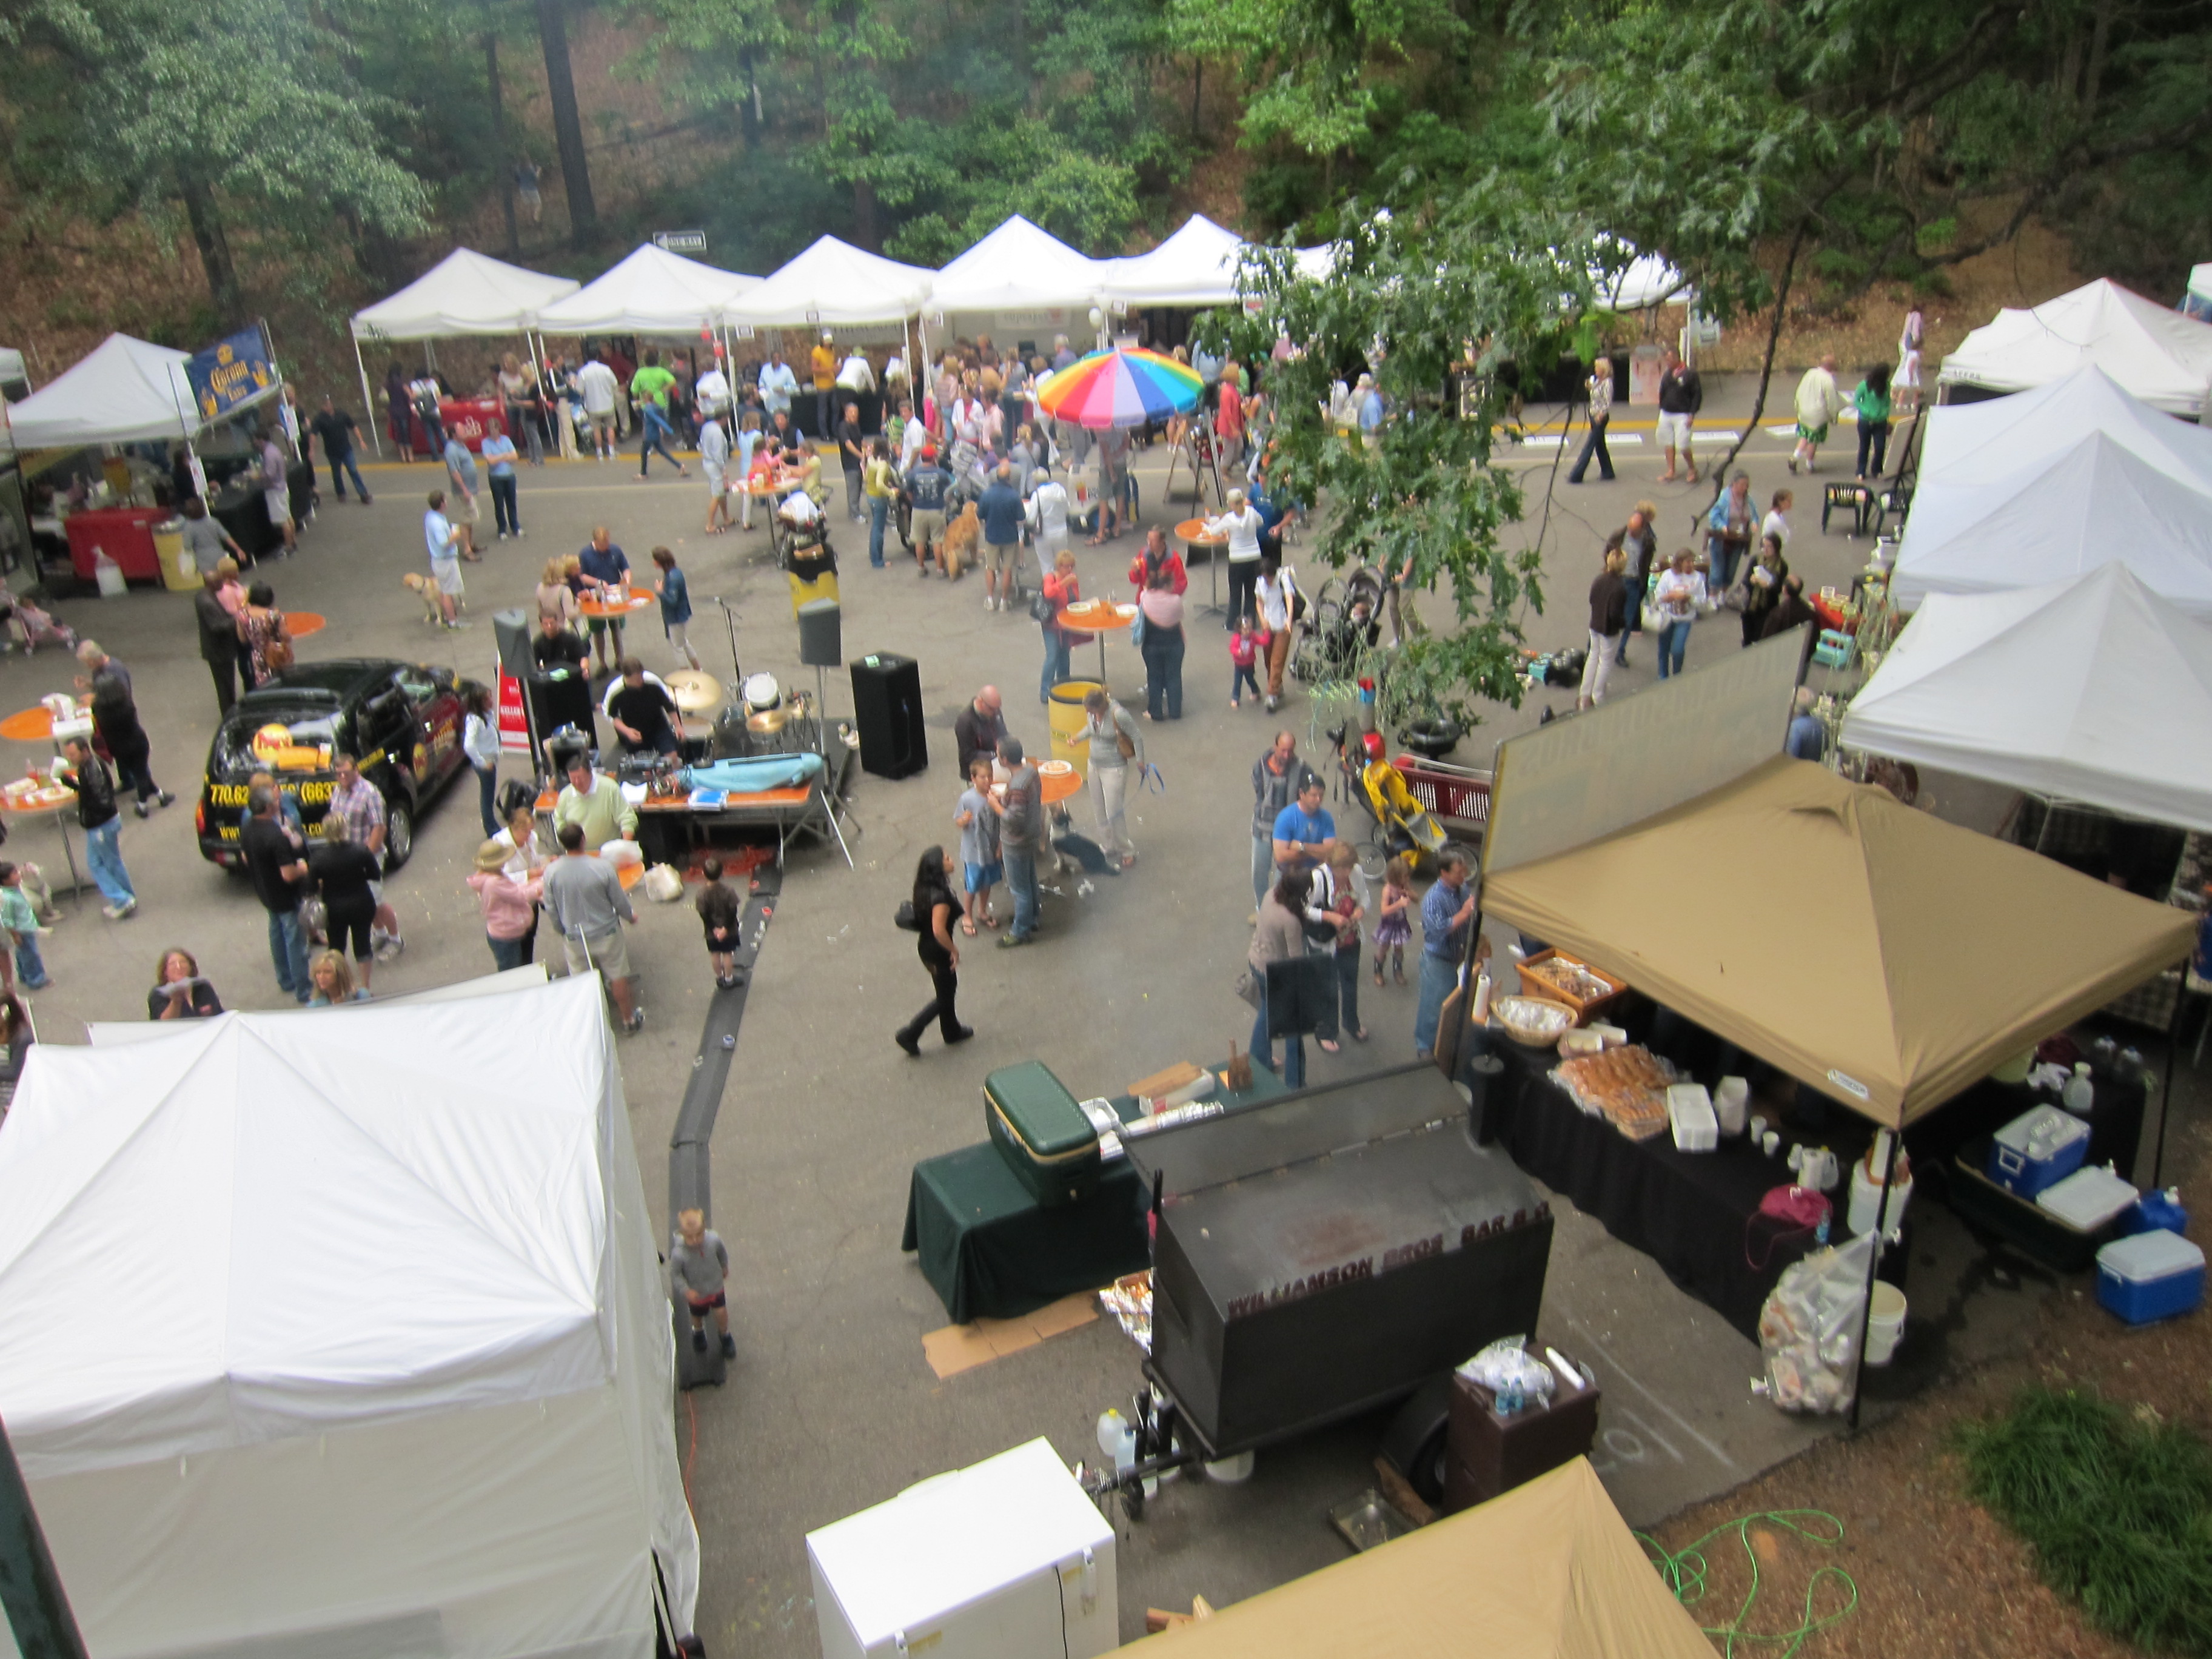 “Chastain Park Arts Festival Wows ‘Em Four Straight Years in a Row”